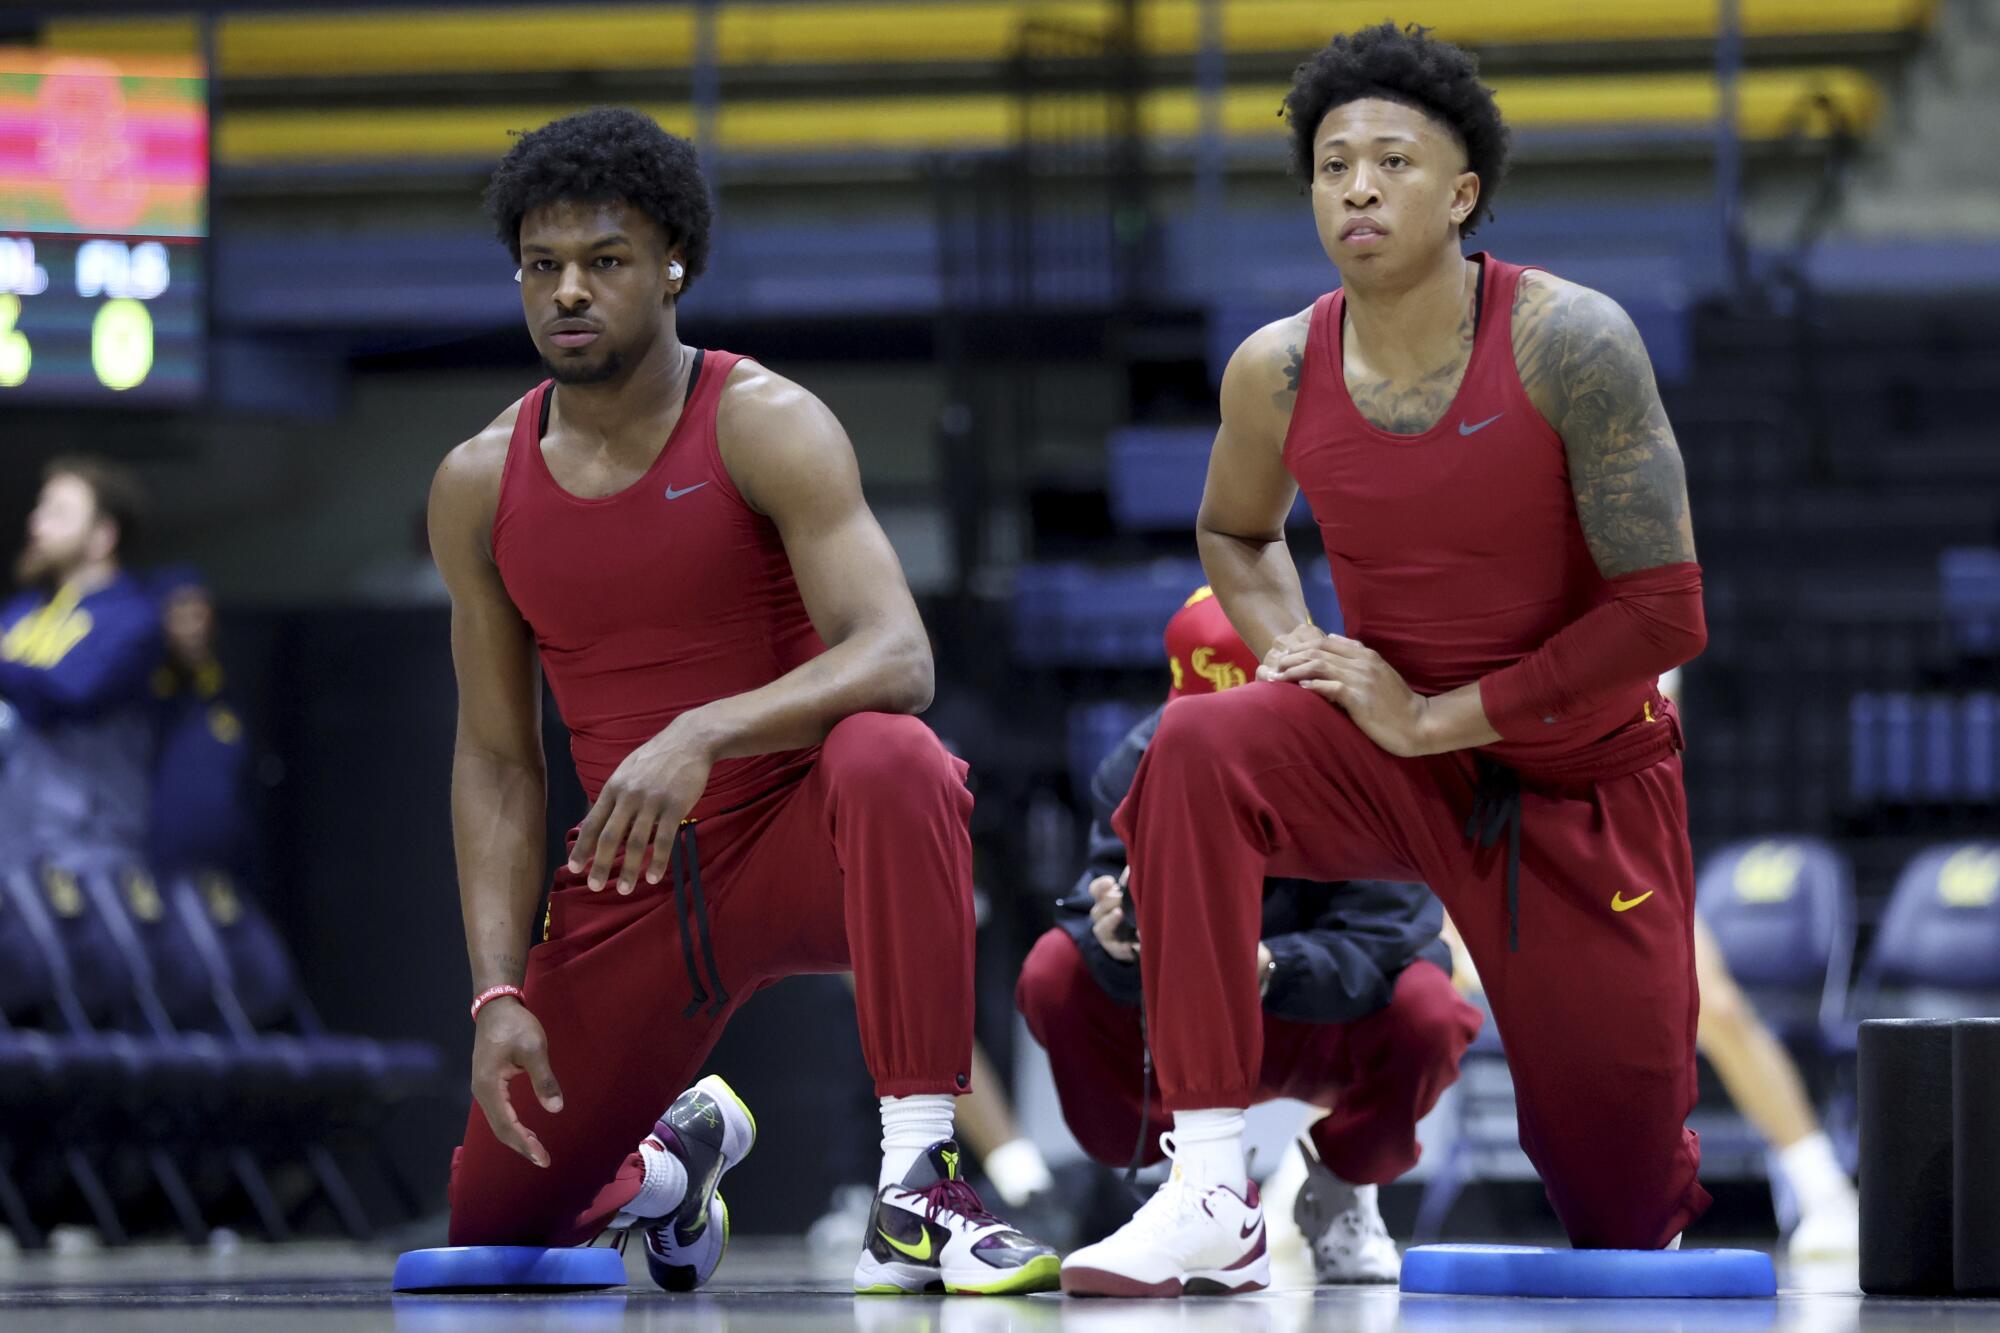 USC guards Boogie Ellis and Bronny James warm up before the team plays Cal on Feb. 7.